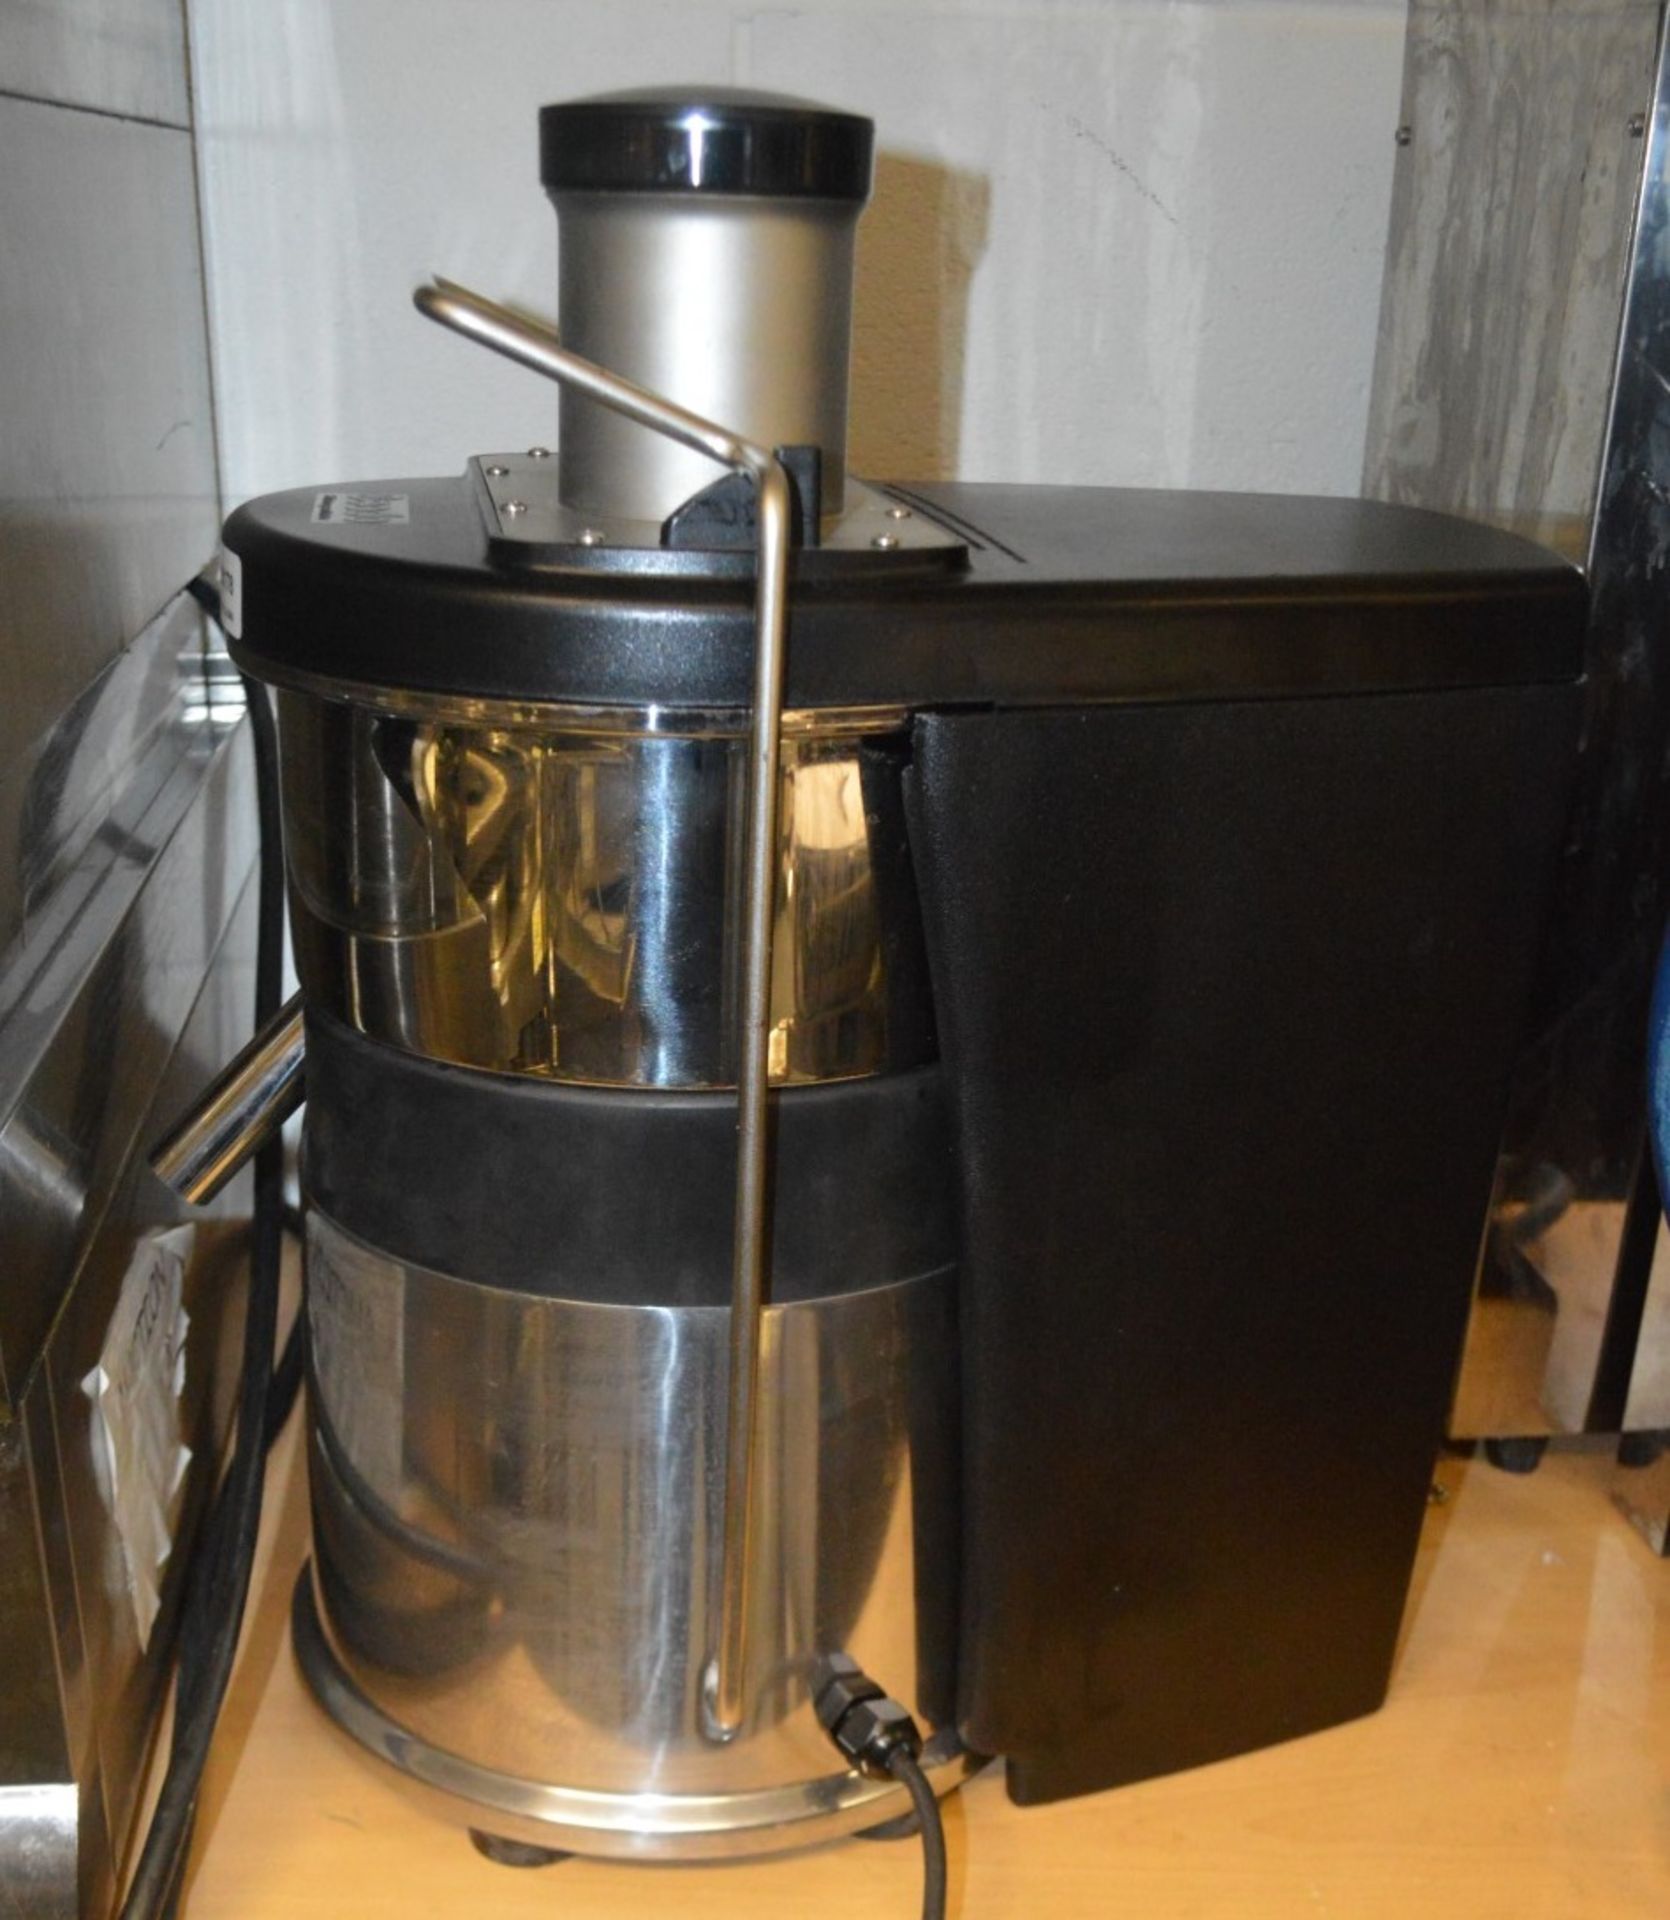 1 x Ceado ES700 Professional High Powered Centrifugal Juice Extractor - Original RRP £2,200 - Image 3 of 7